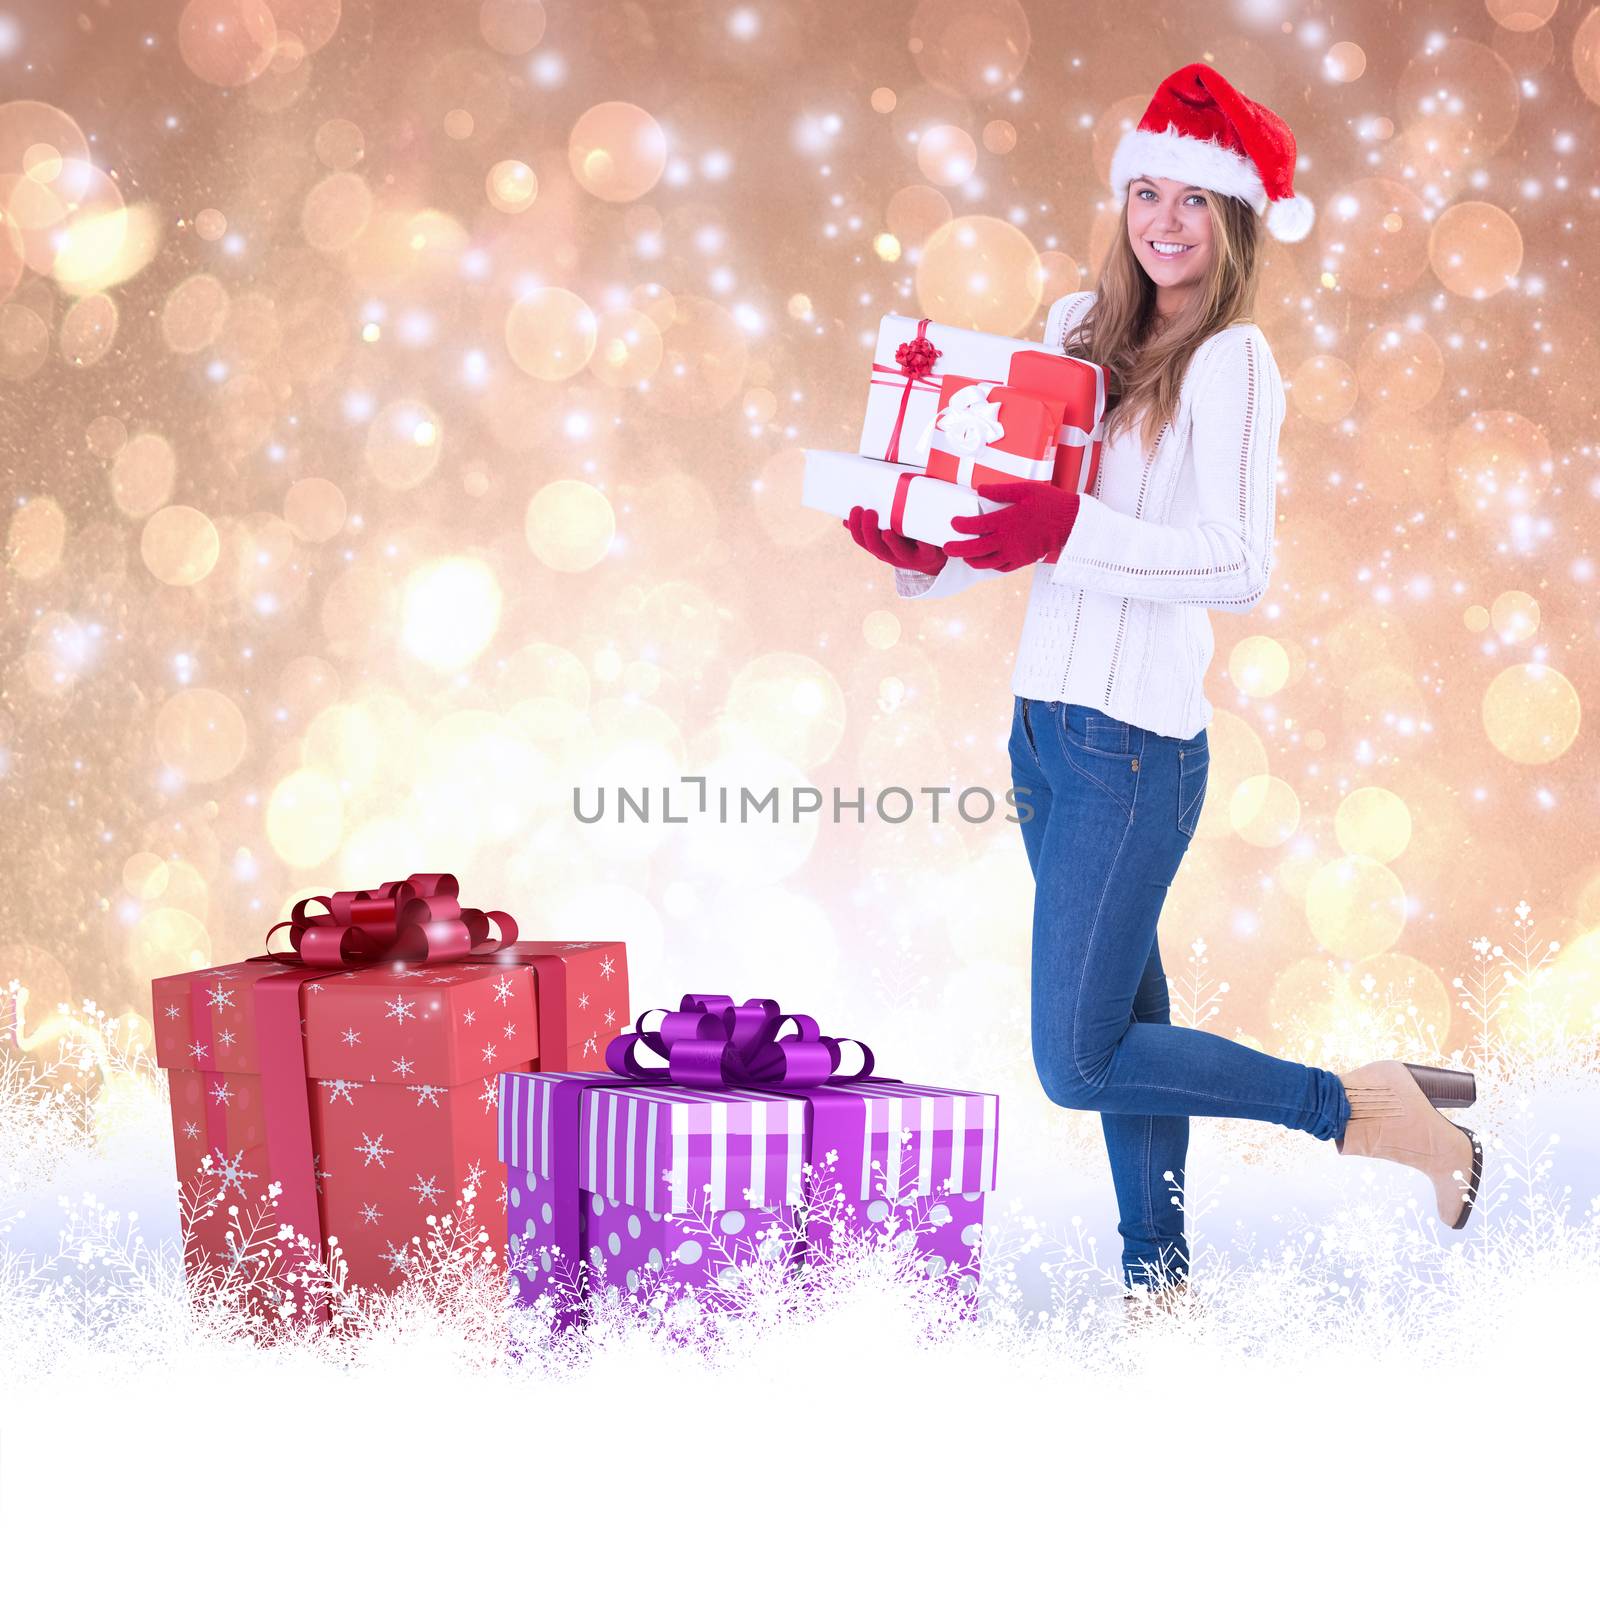 Festive blonde holding pile of gifts against yellow abstract light spot design